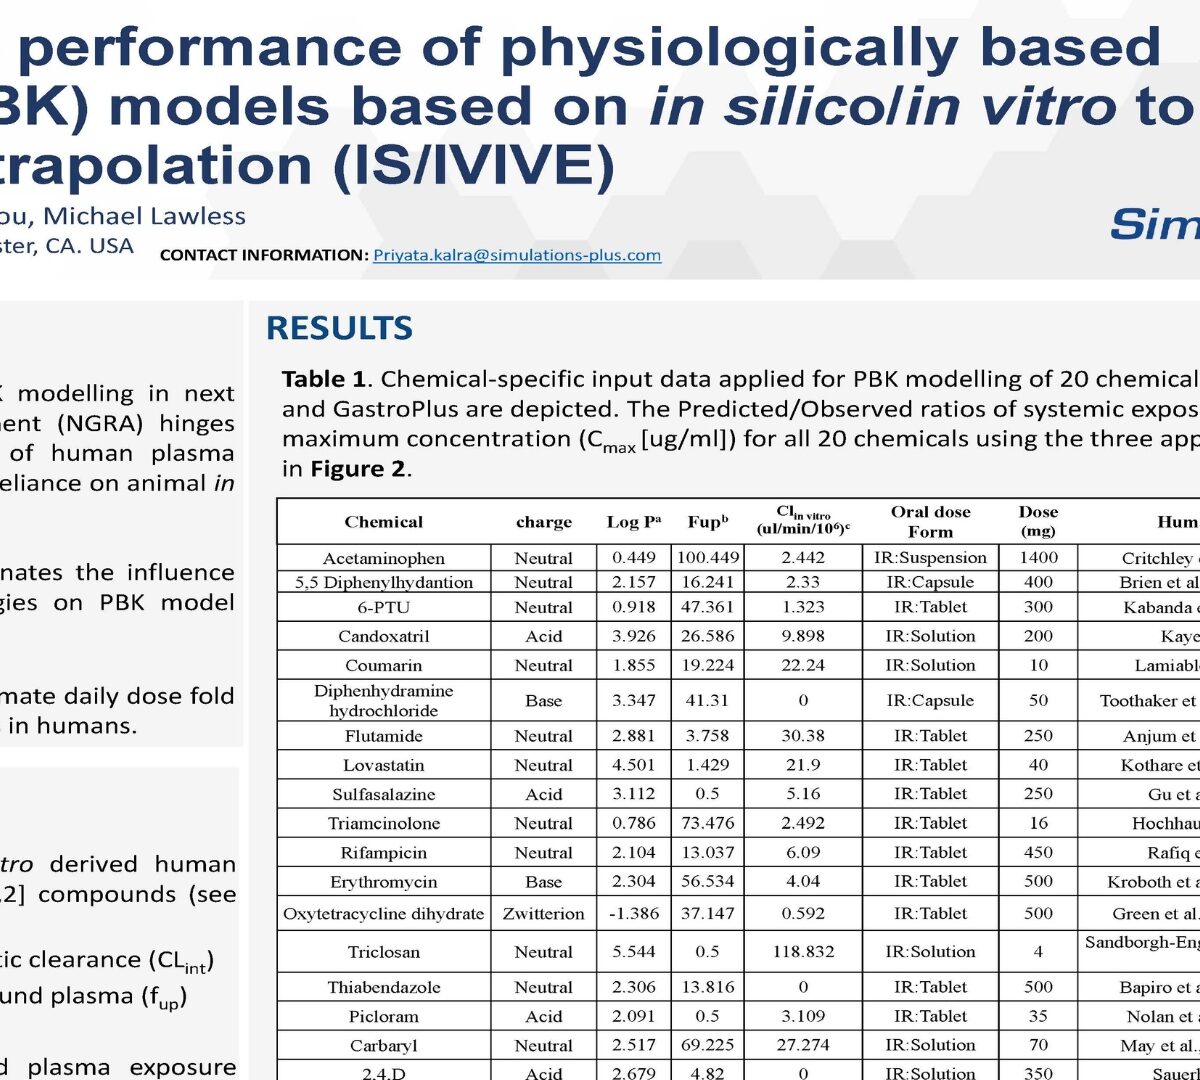 Predictive performance of physiologically based kinetic (PBK) models based on in silic o/ in vitro to in vivo extrapolation (IS/IVIVE)